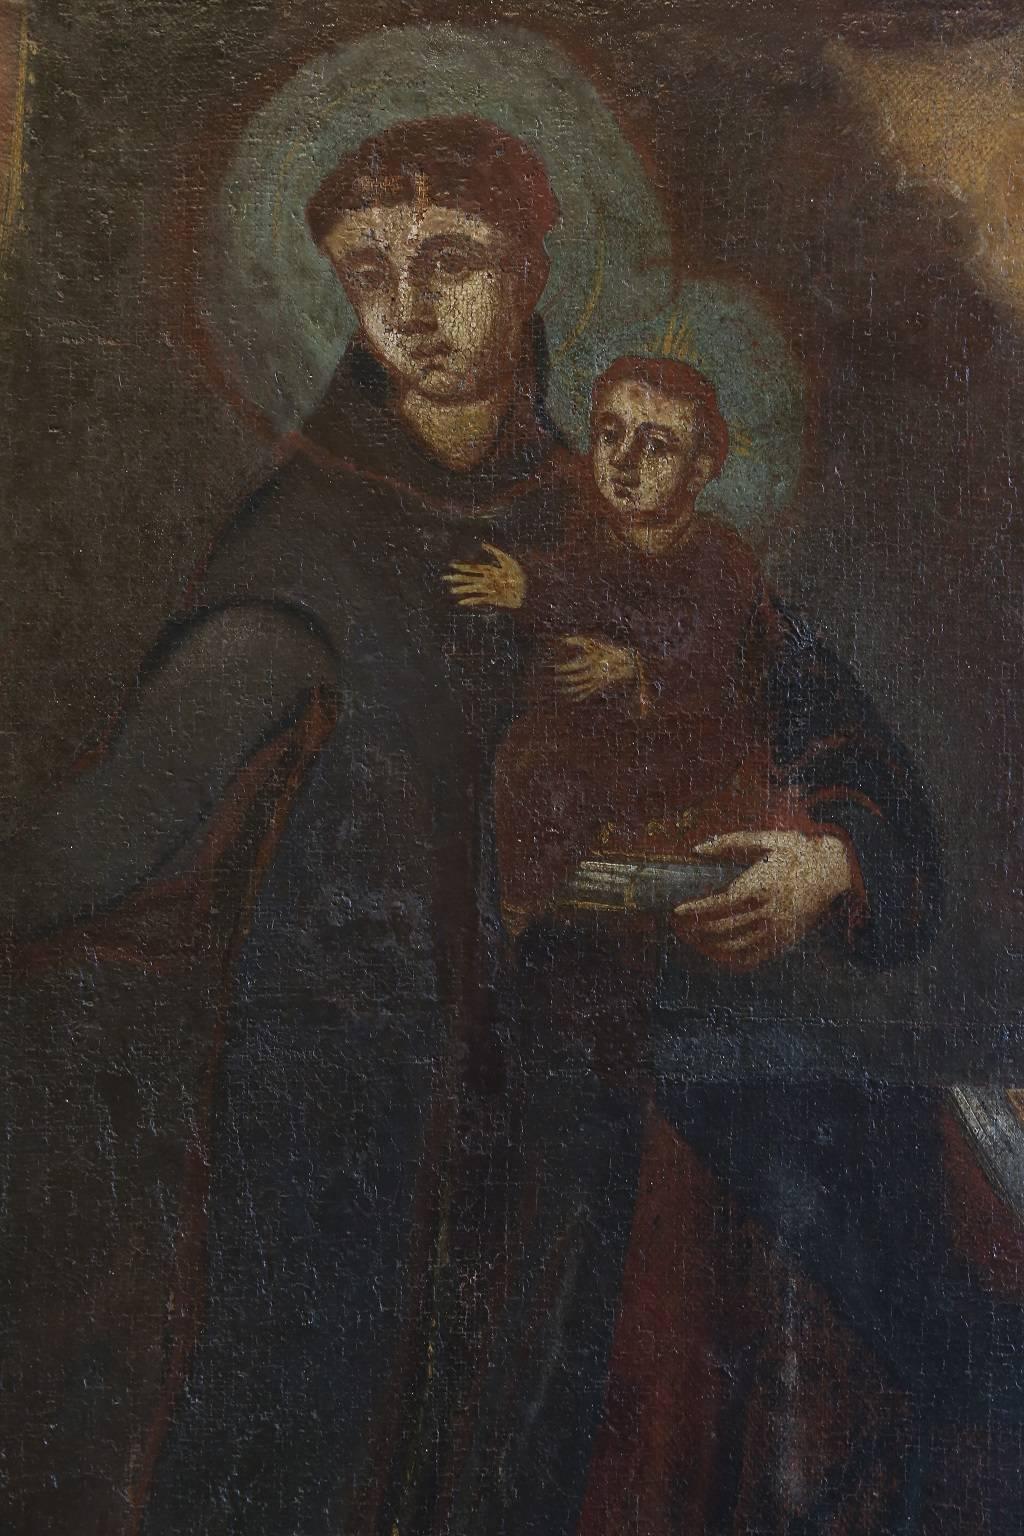 Cuzco oil of Saint Anthony (San Antonio) of Padua with the Christ Child on canvas set in a decorative gilded frame, by an unknown Cuzco School artist. Original late 18th century canvas attached to a 20th century canvas with some flaking and patches,